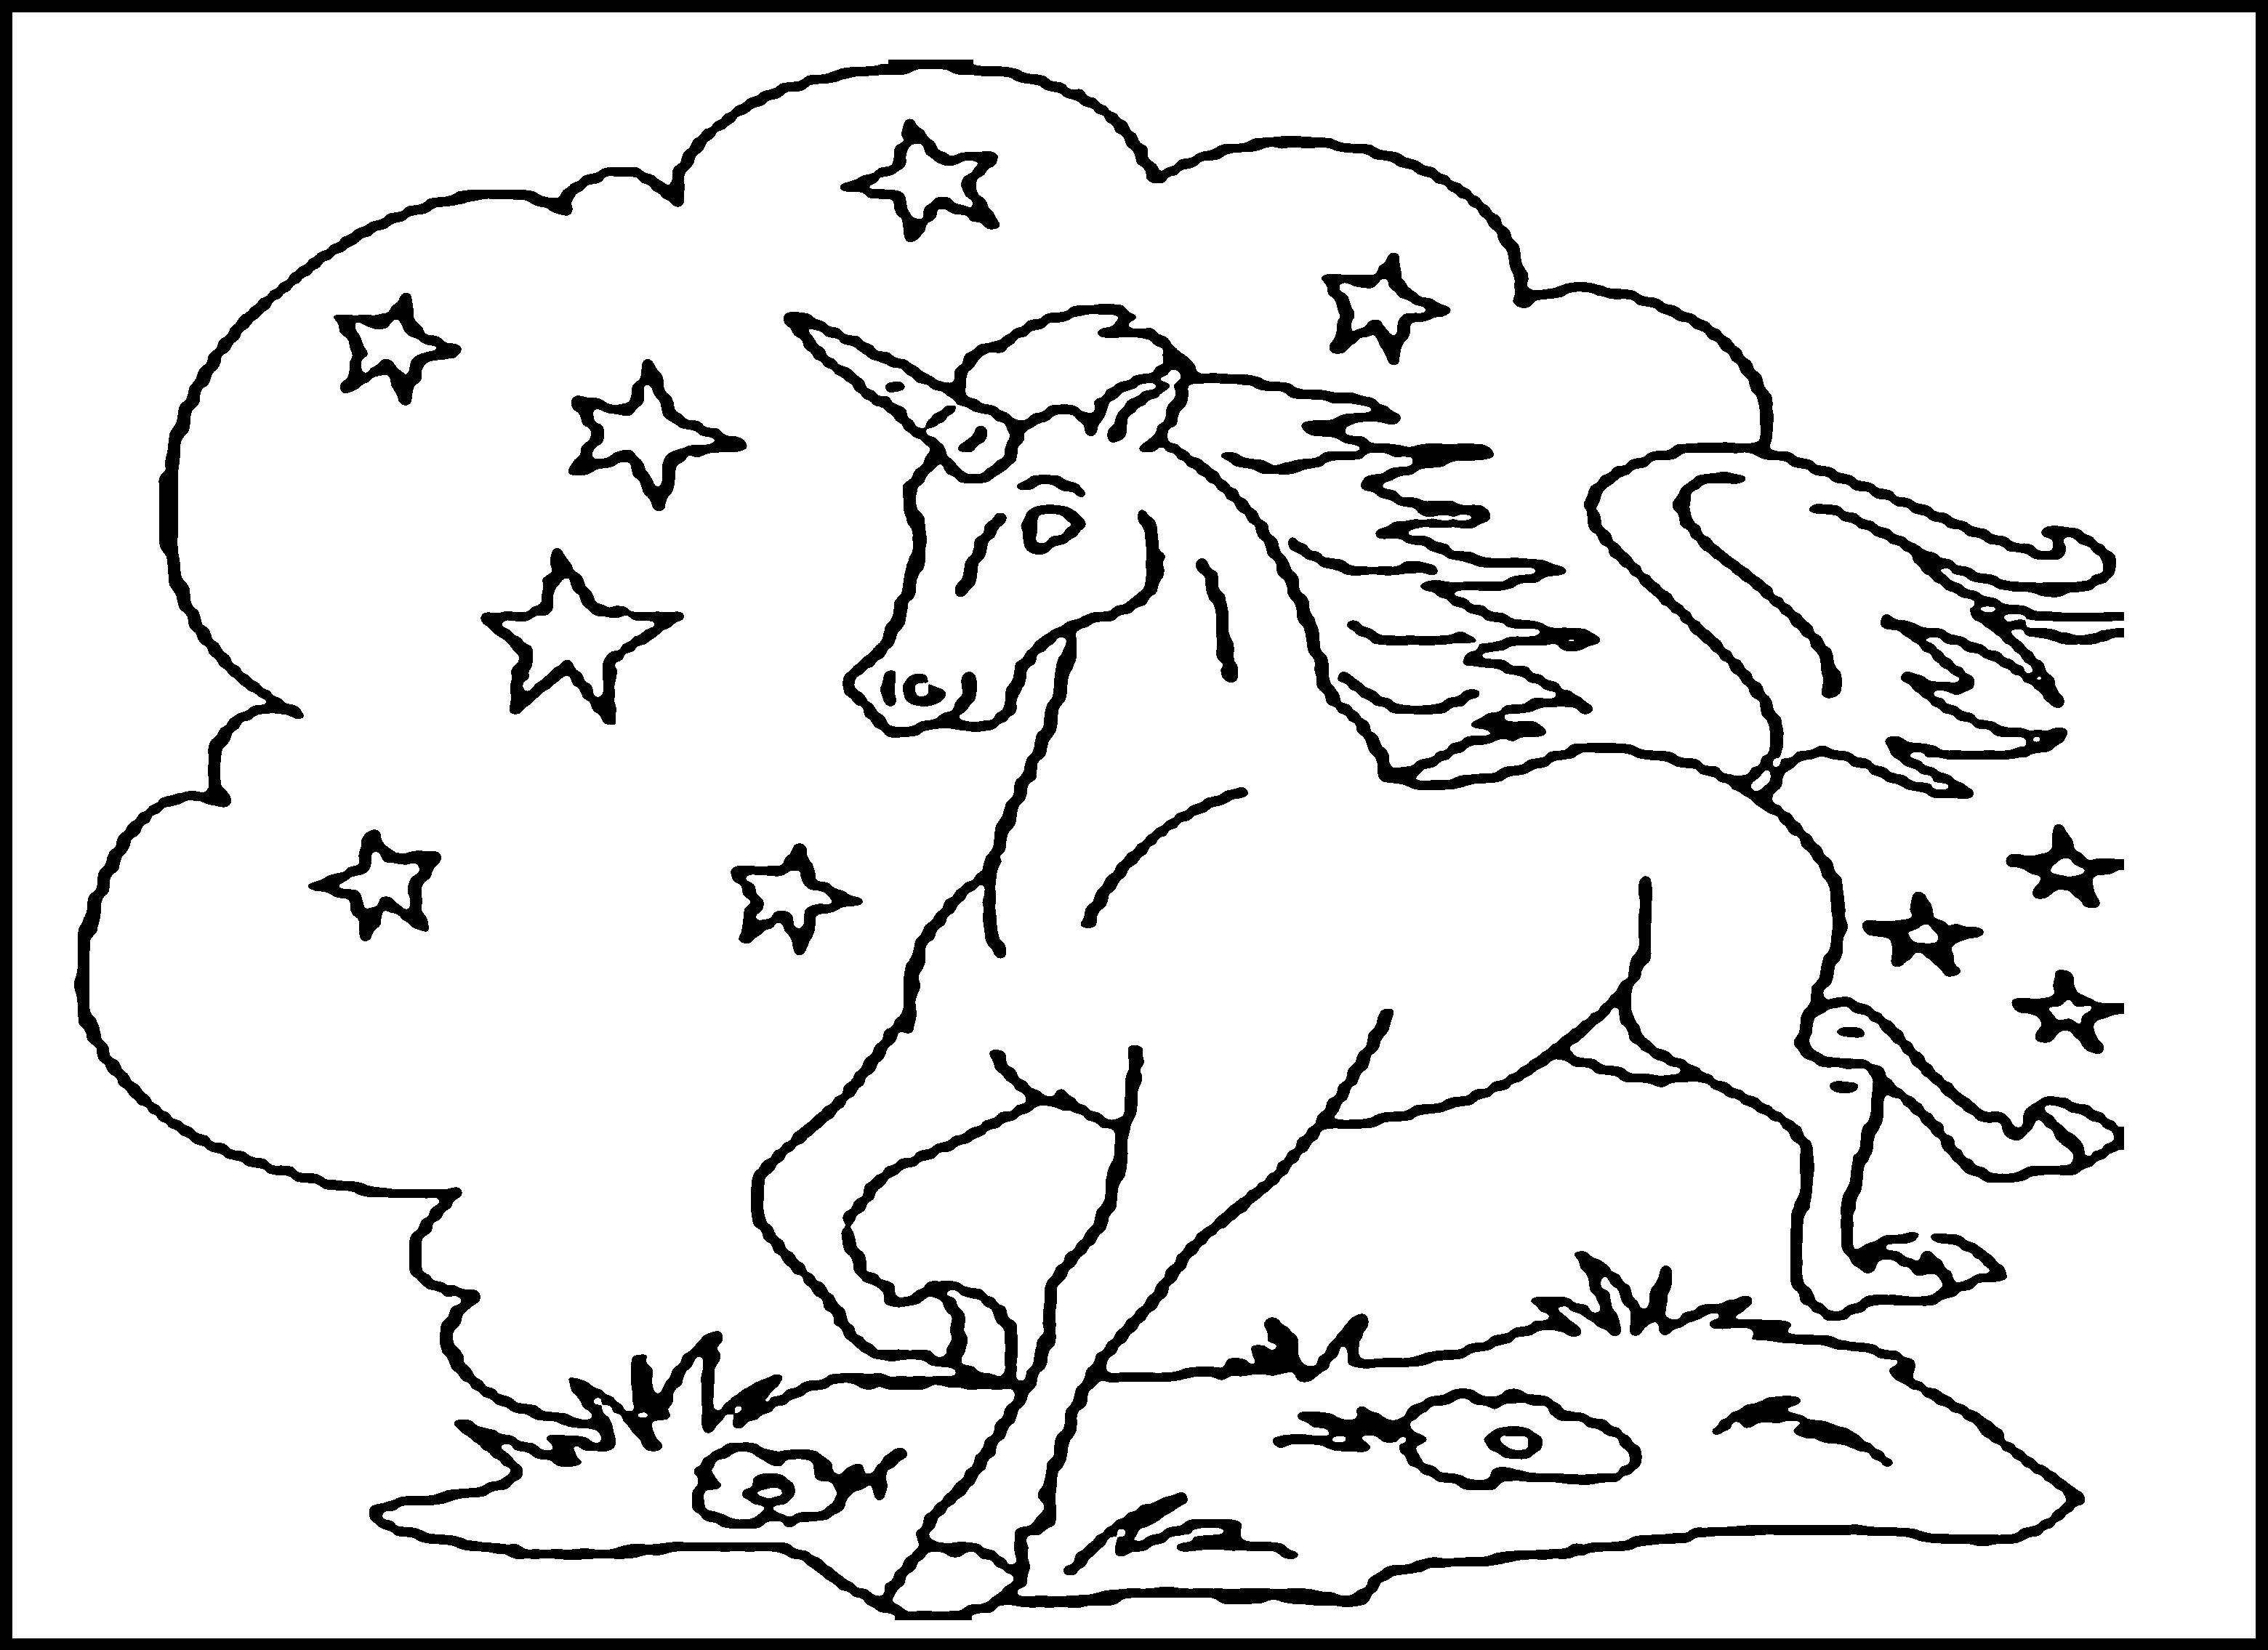 Coloring Unicorn in the night. Category The magic of creation. Tags:  unicorn, pony.